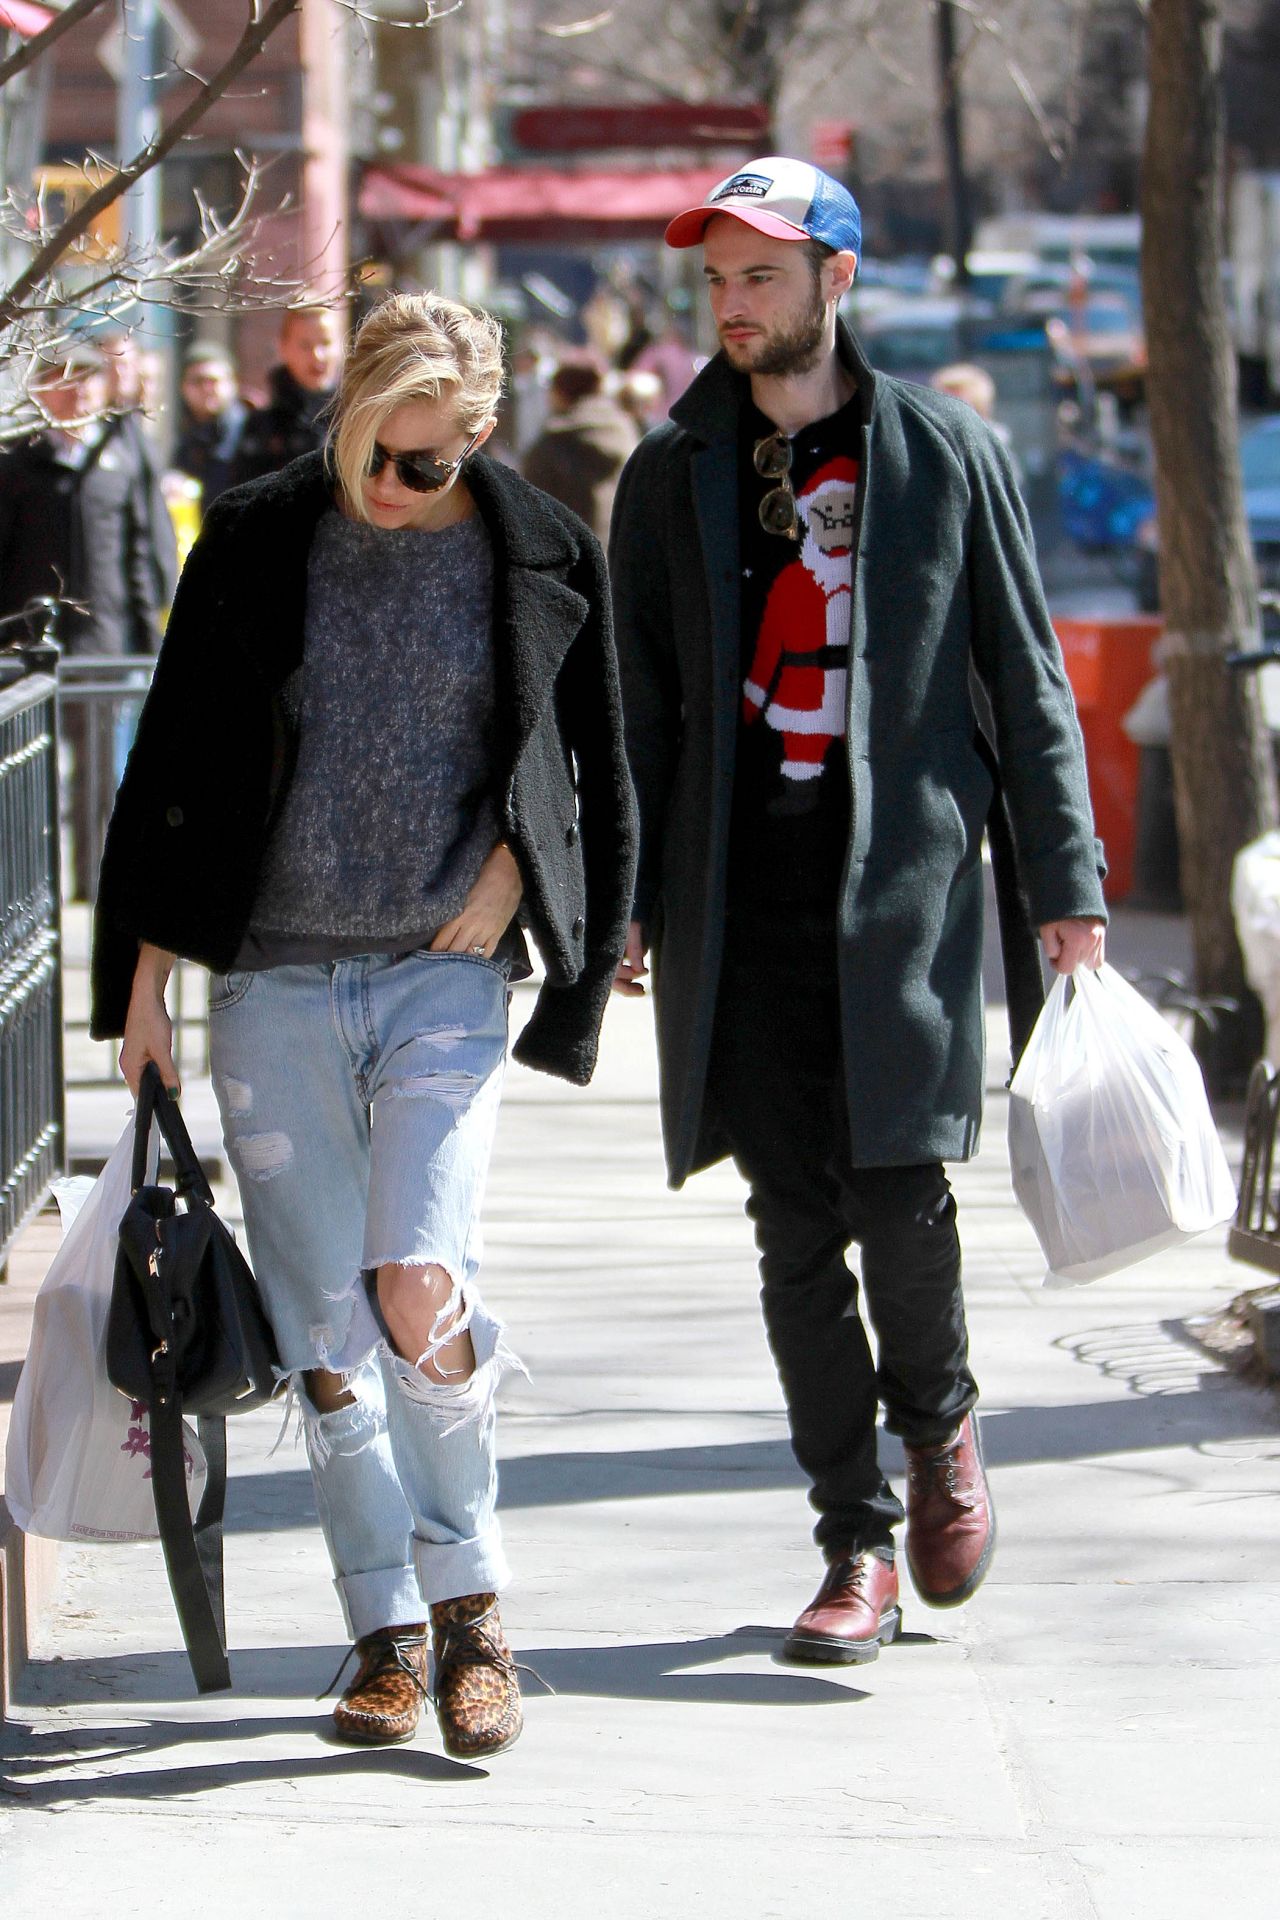 Sienna Miller in Ripped Jeans - Out in New York City - March 2015 ...